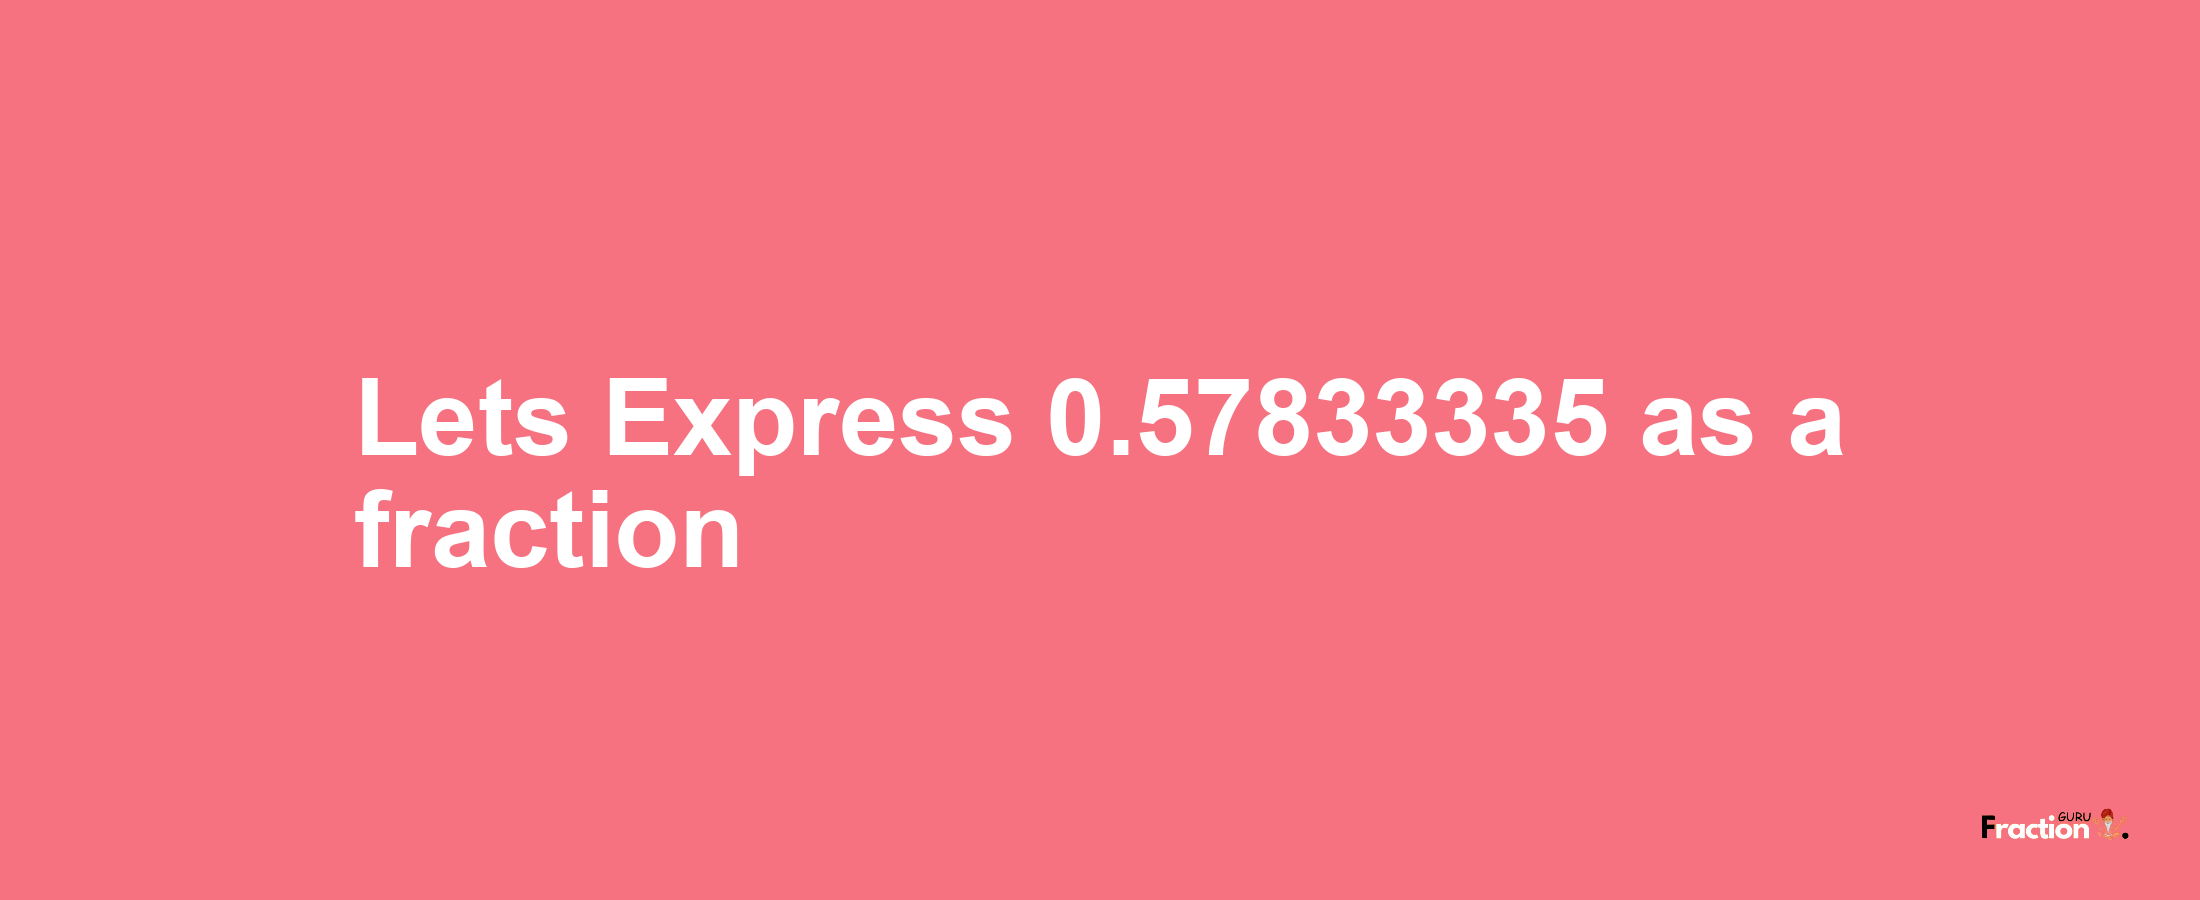 Lets Express 0.57833335 as afraction